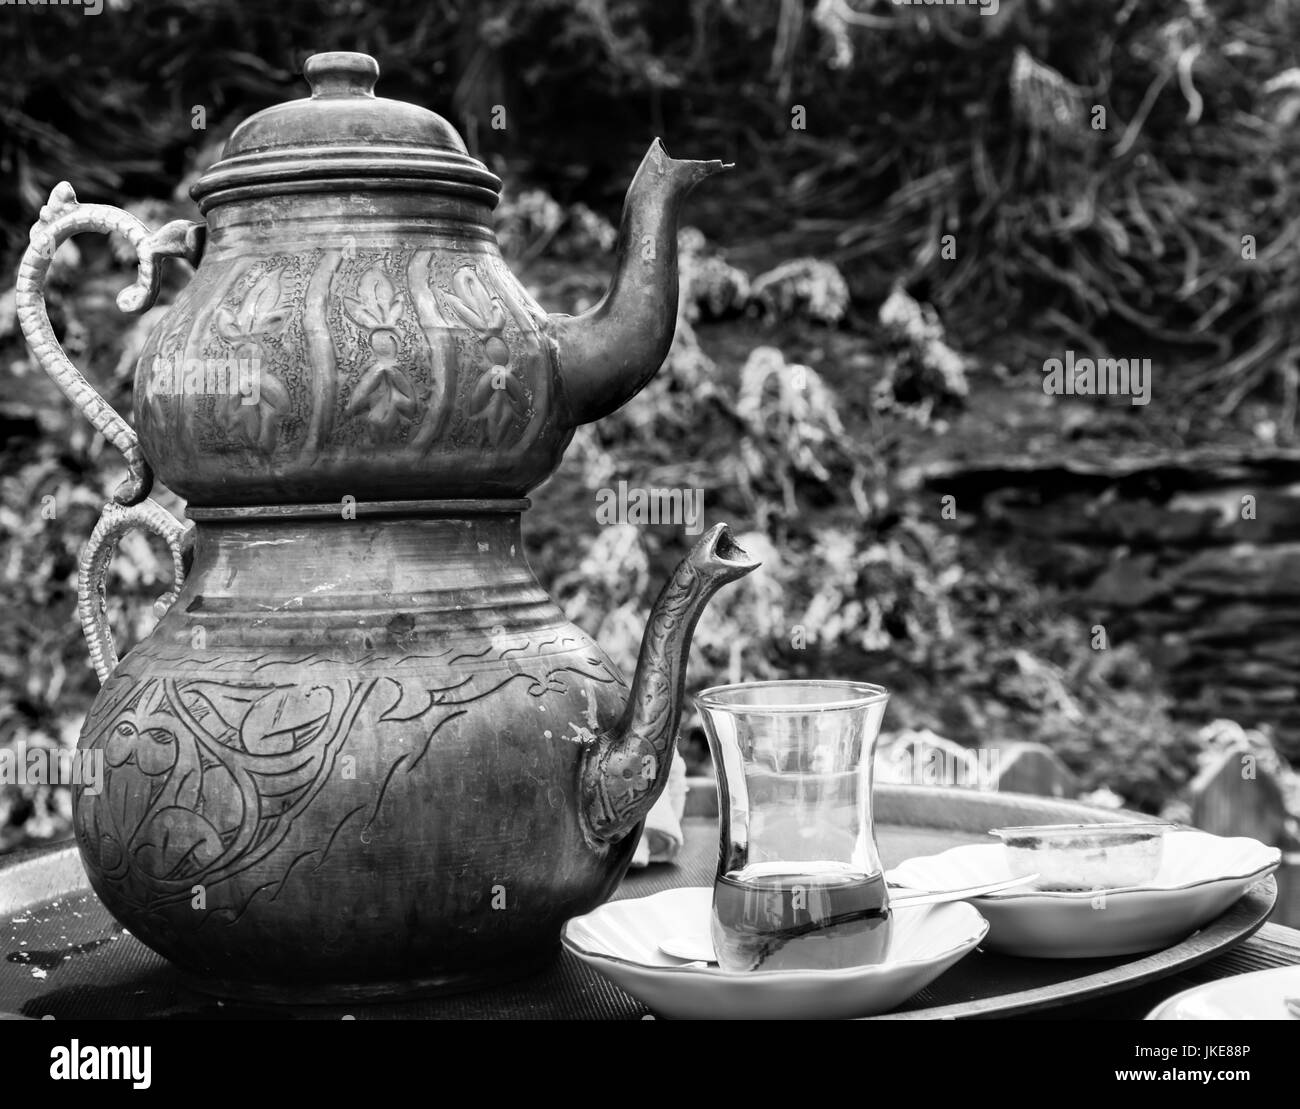 Two vintage engraved copper Turkish teapots with double stacked kettles allowing tea to be brewed, with one glass cup filled with tea, served outdoors Stock Photo